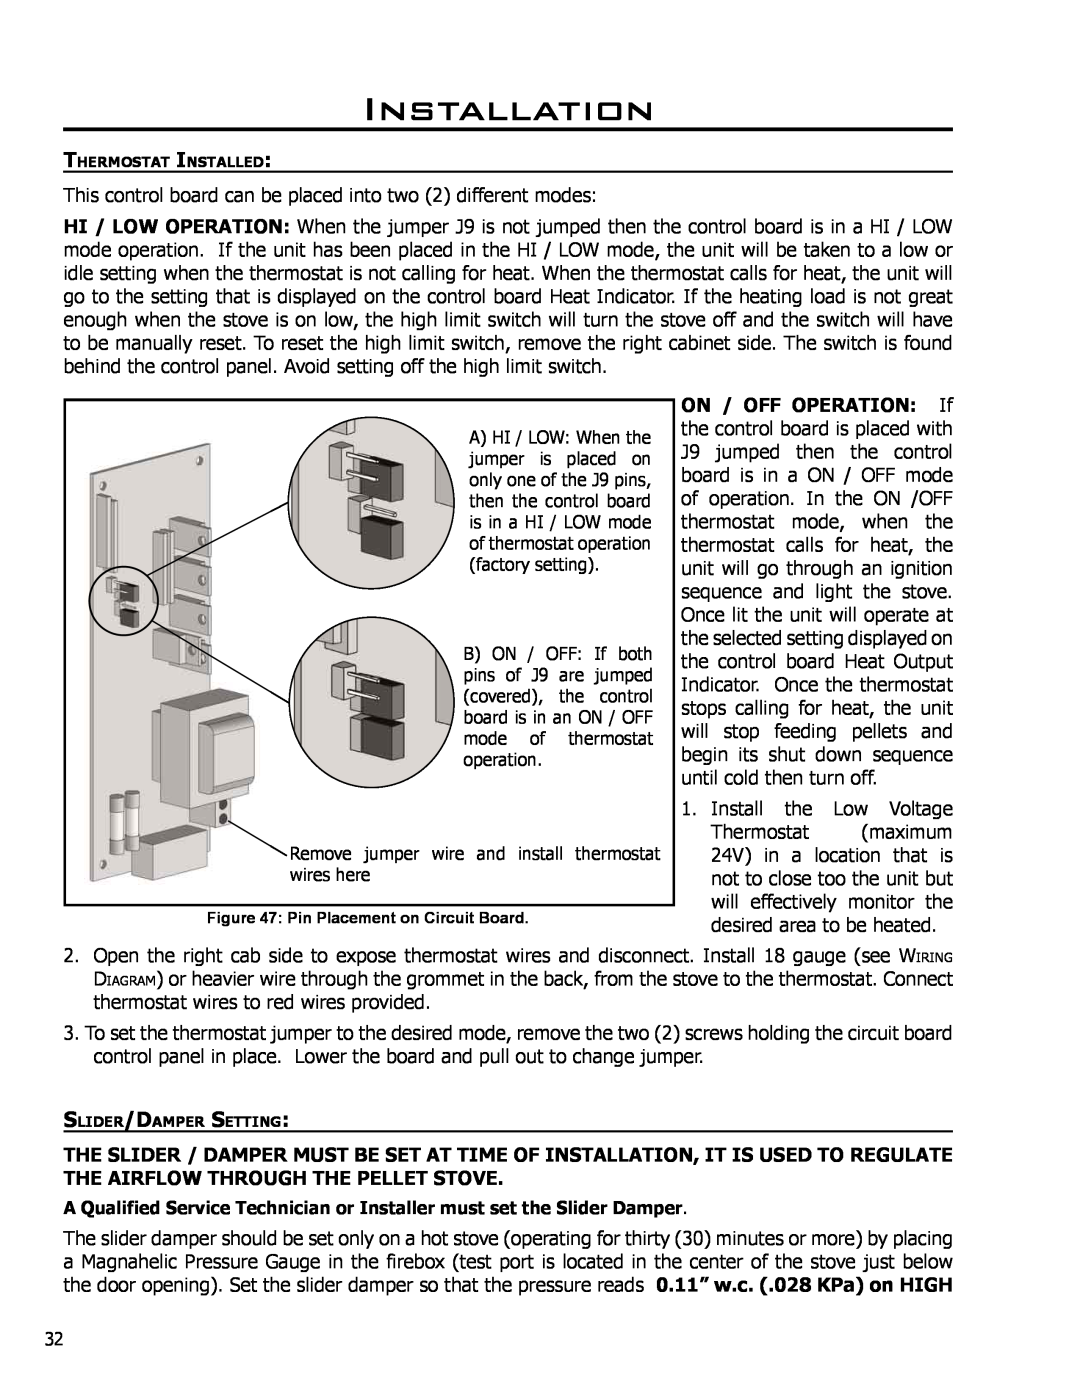 Enviro Meridian owner manual Installation, Install the Low Voltage 